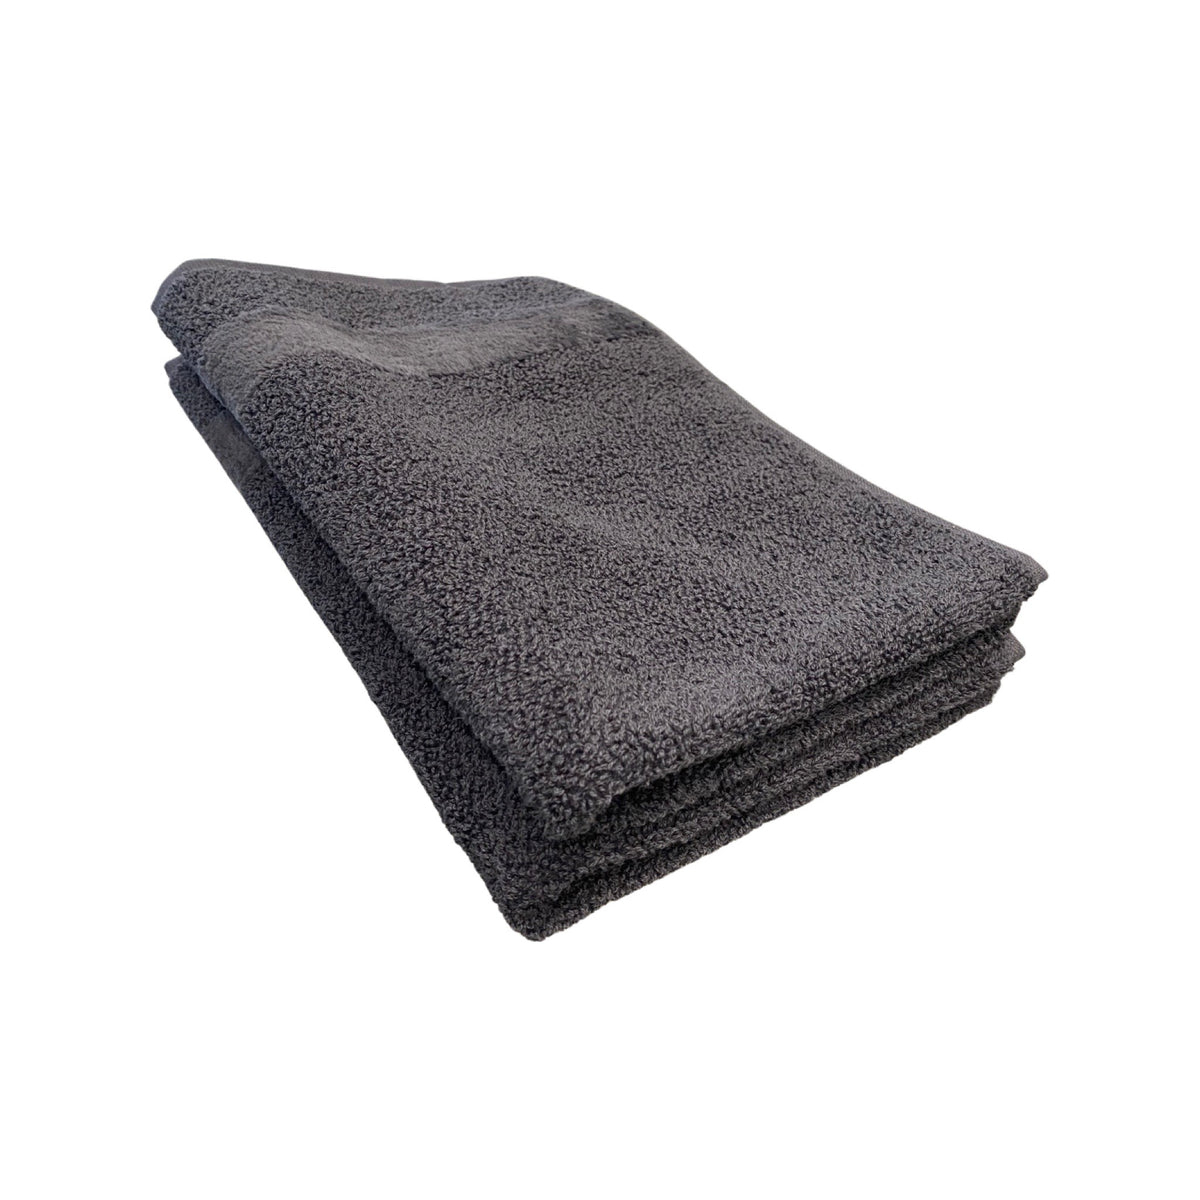 Fyber Towels - Charcoal Grey